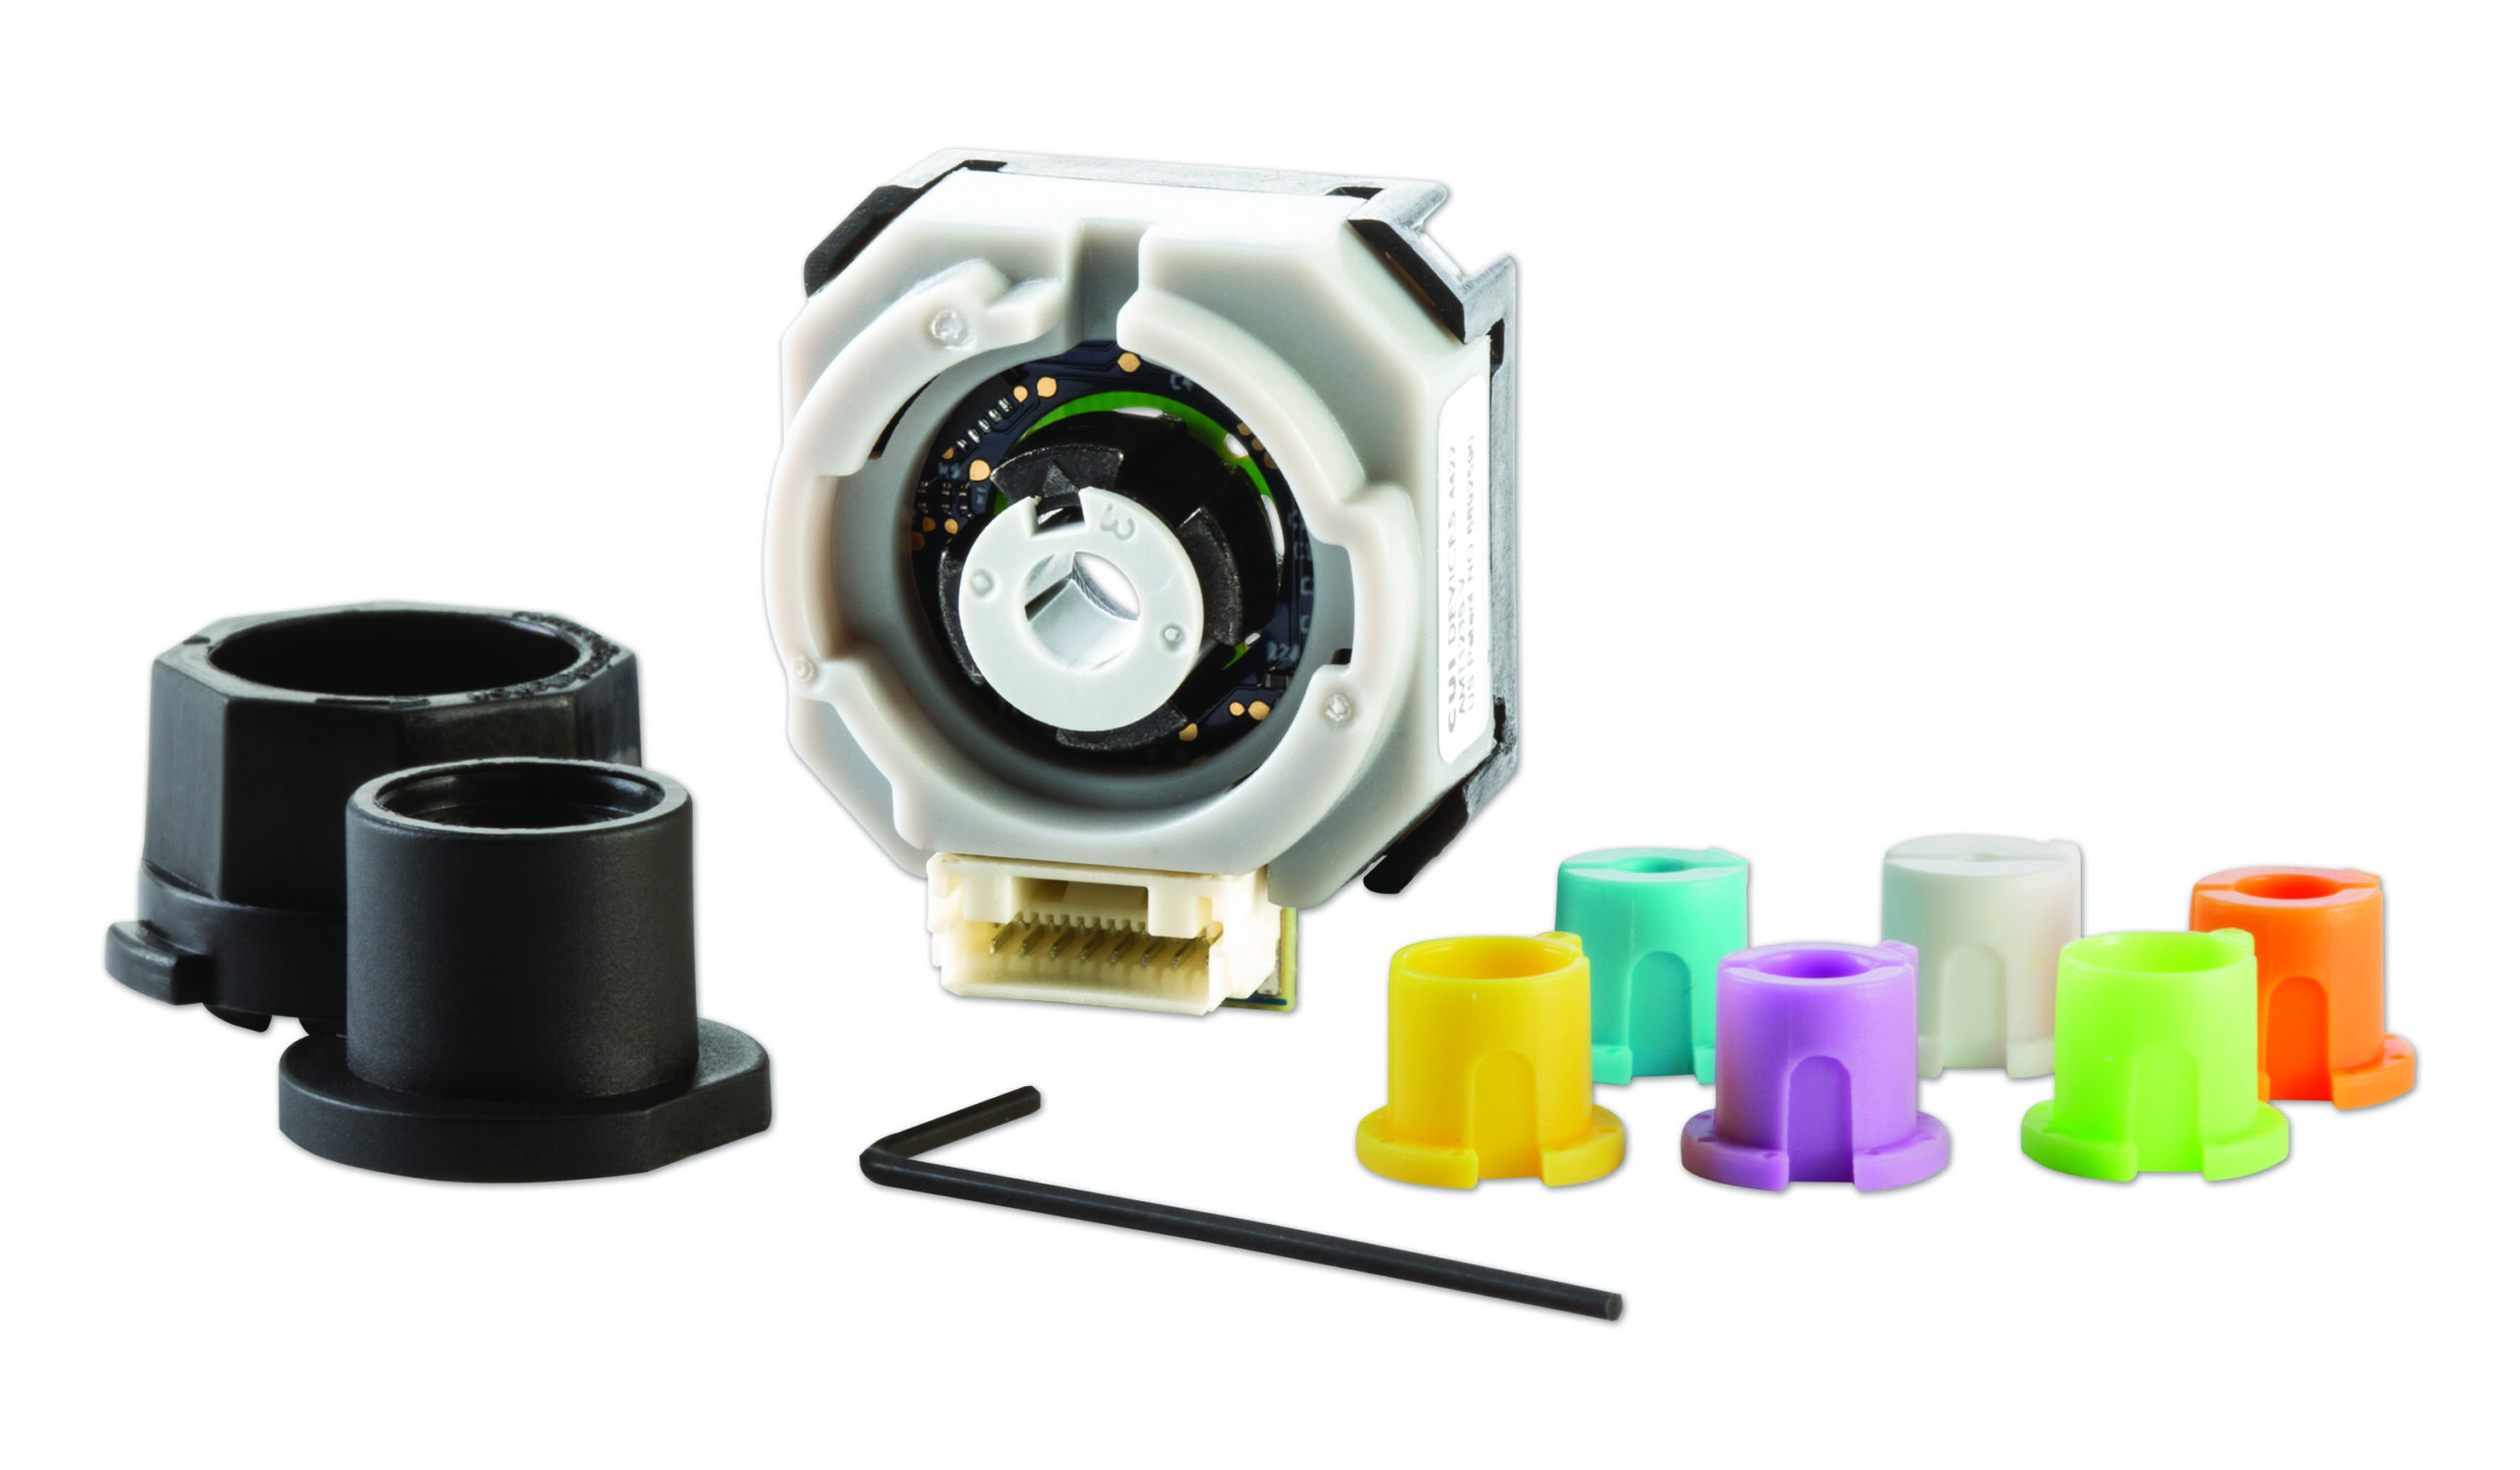 New Incremental Encoder Supports Smaller Shaft Sizes from 1 to 6.35 mm